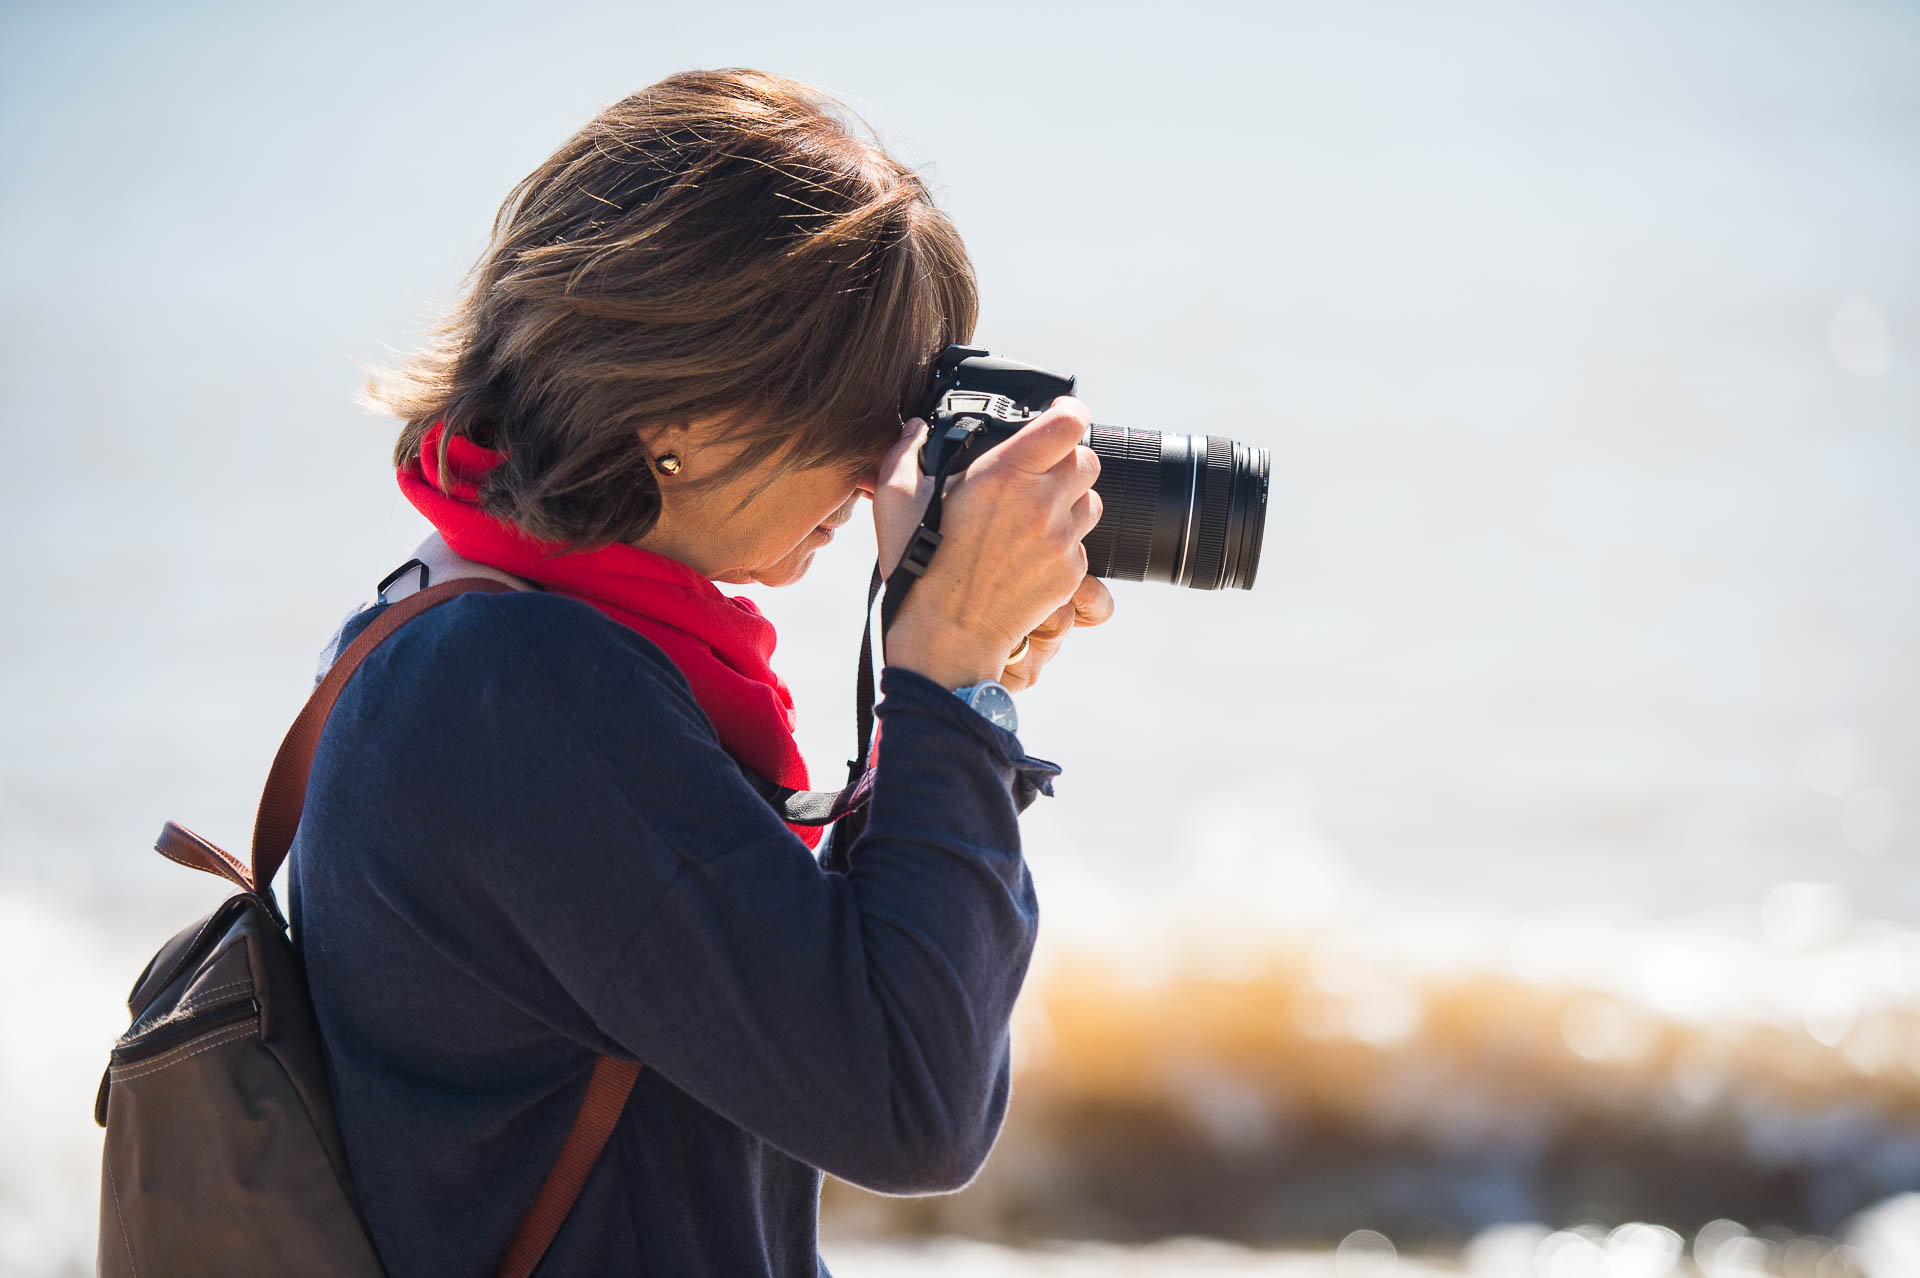 beginners course in photography norfolk